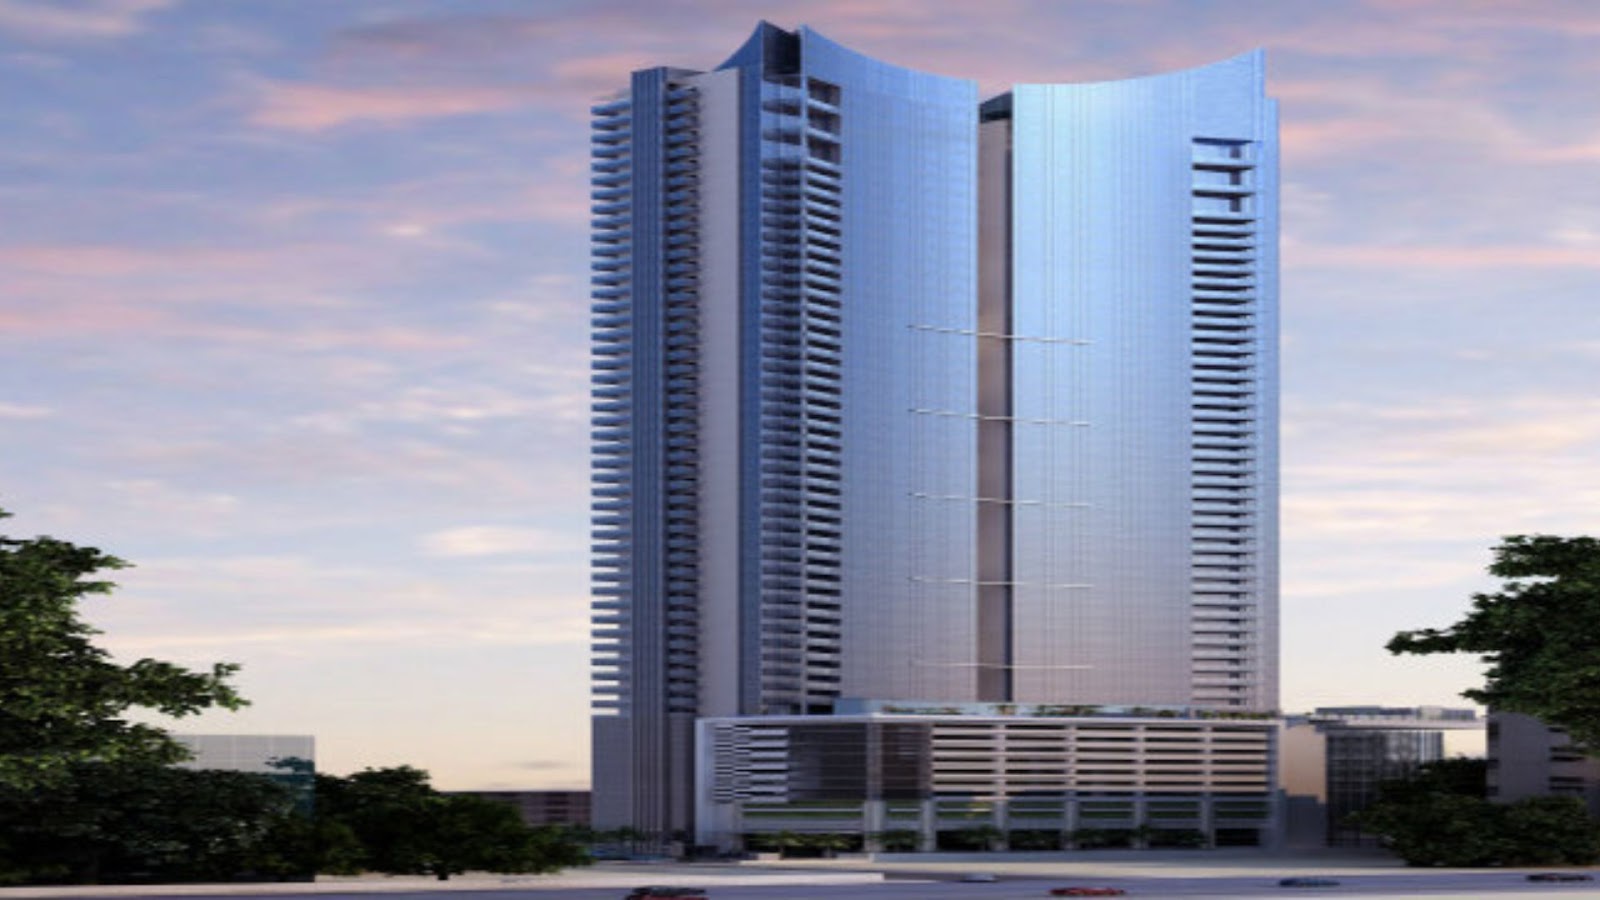 Live the legendary life in Ahuja Towers
